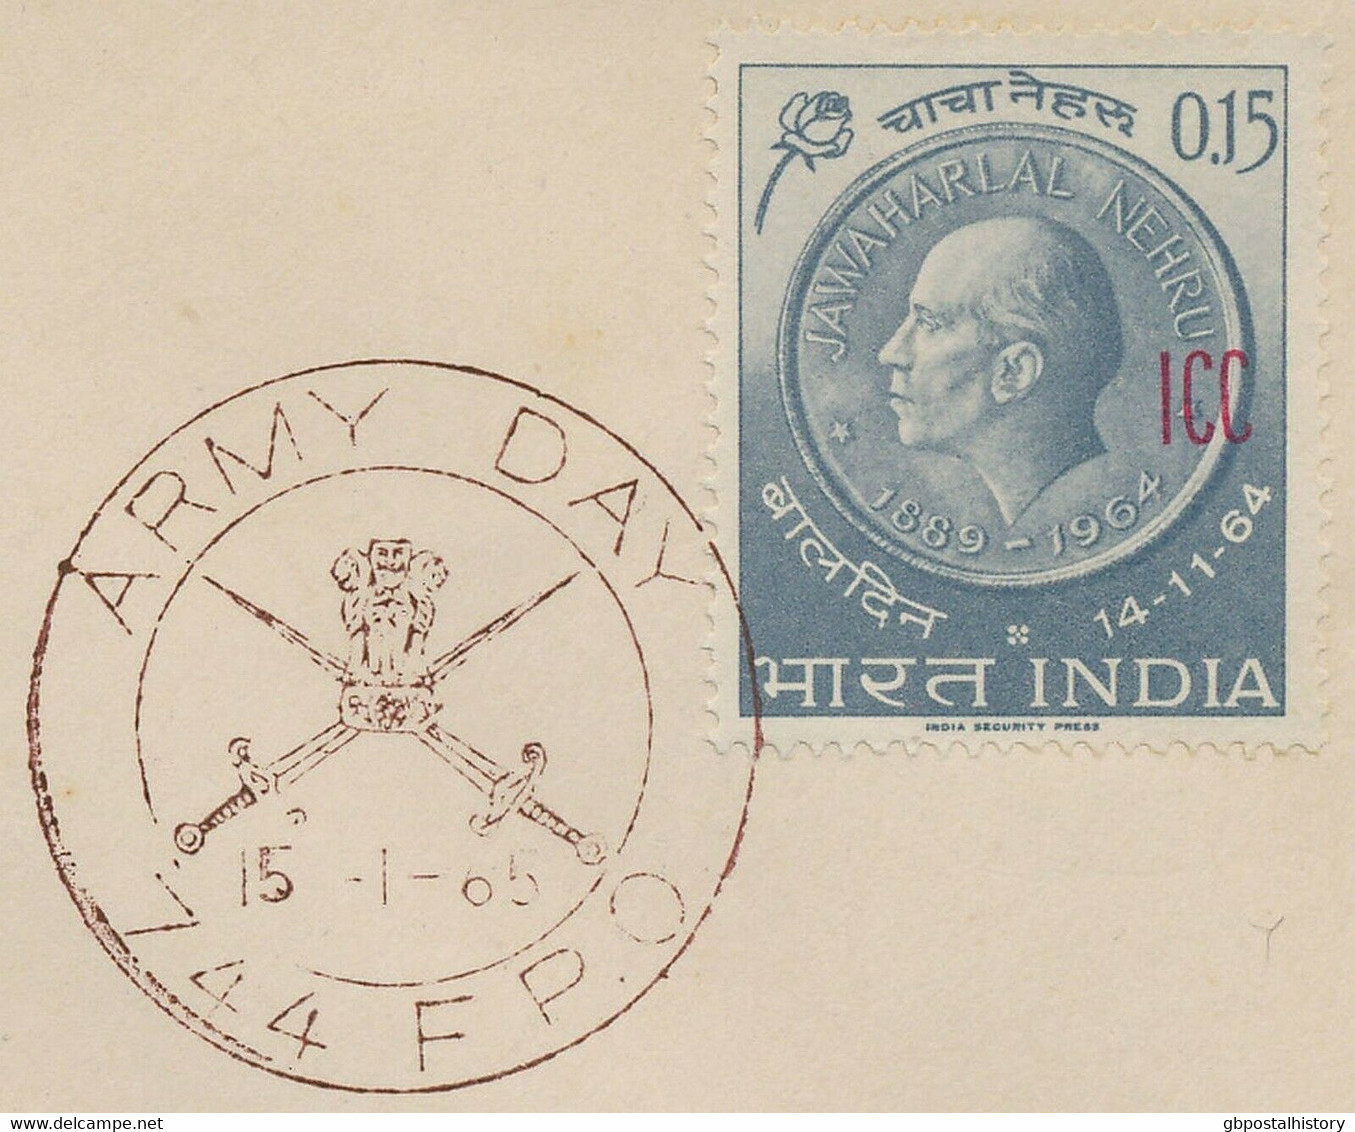 INDIA Indian Police Forces In Laos 1965 Army Day  "ARMY DAY / 744 F.P.O." FDC R! - Military Service Stamp